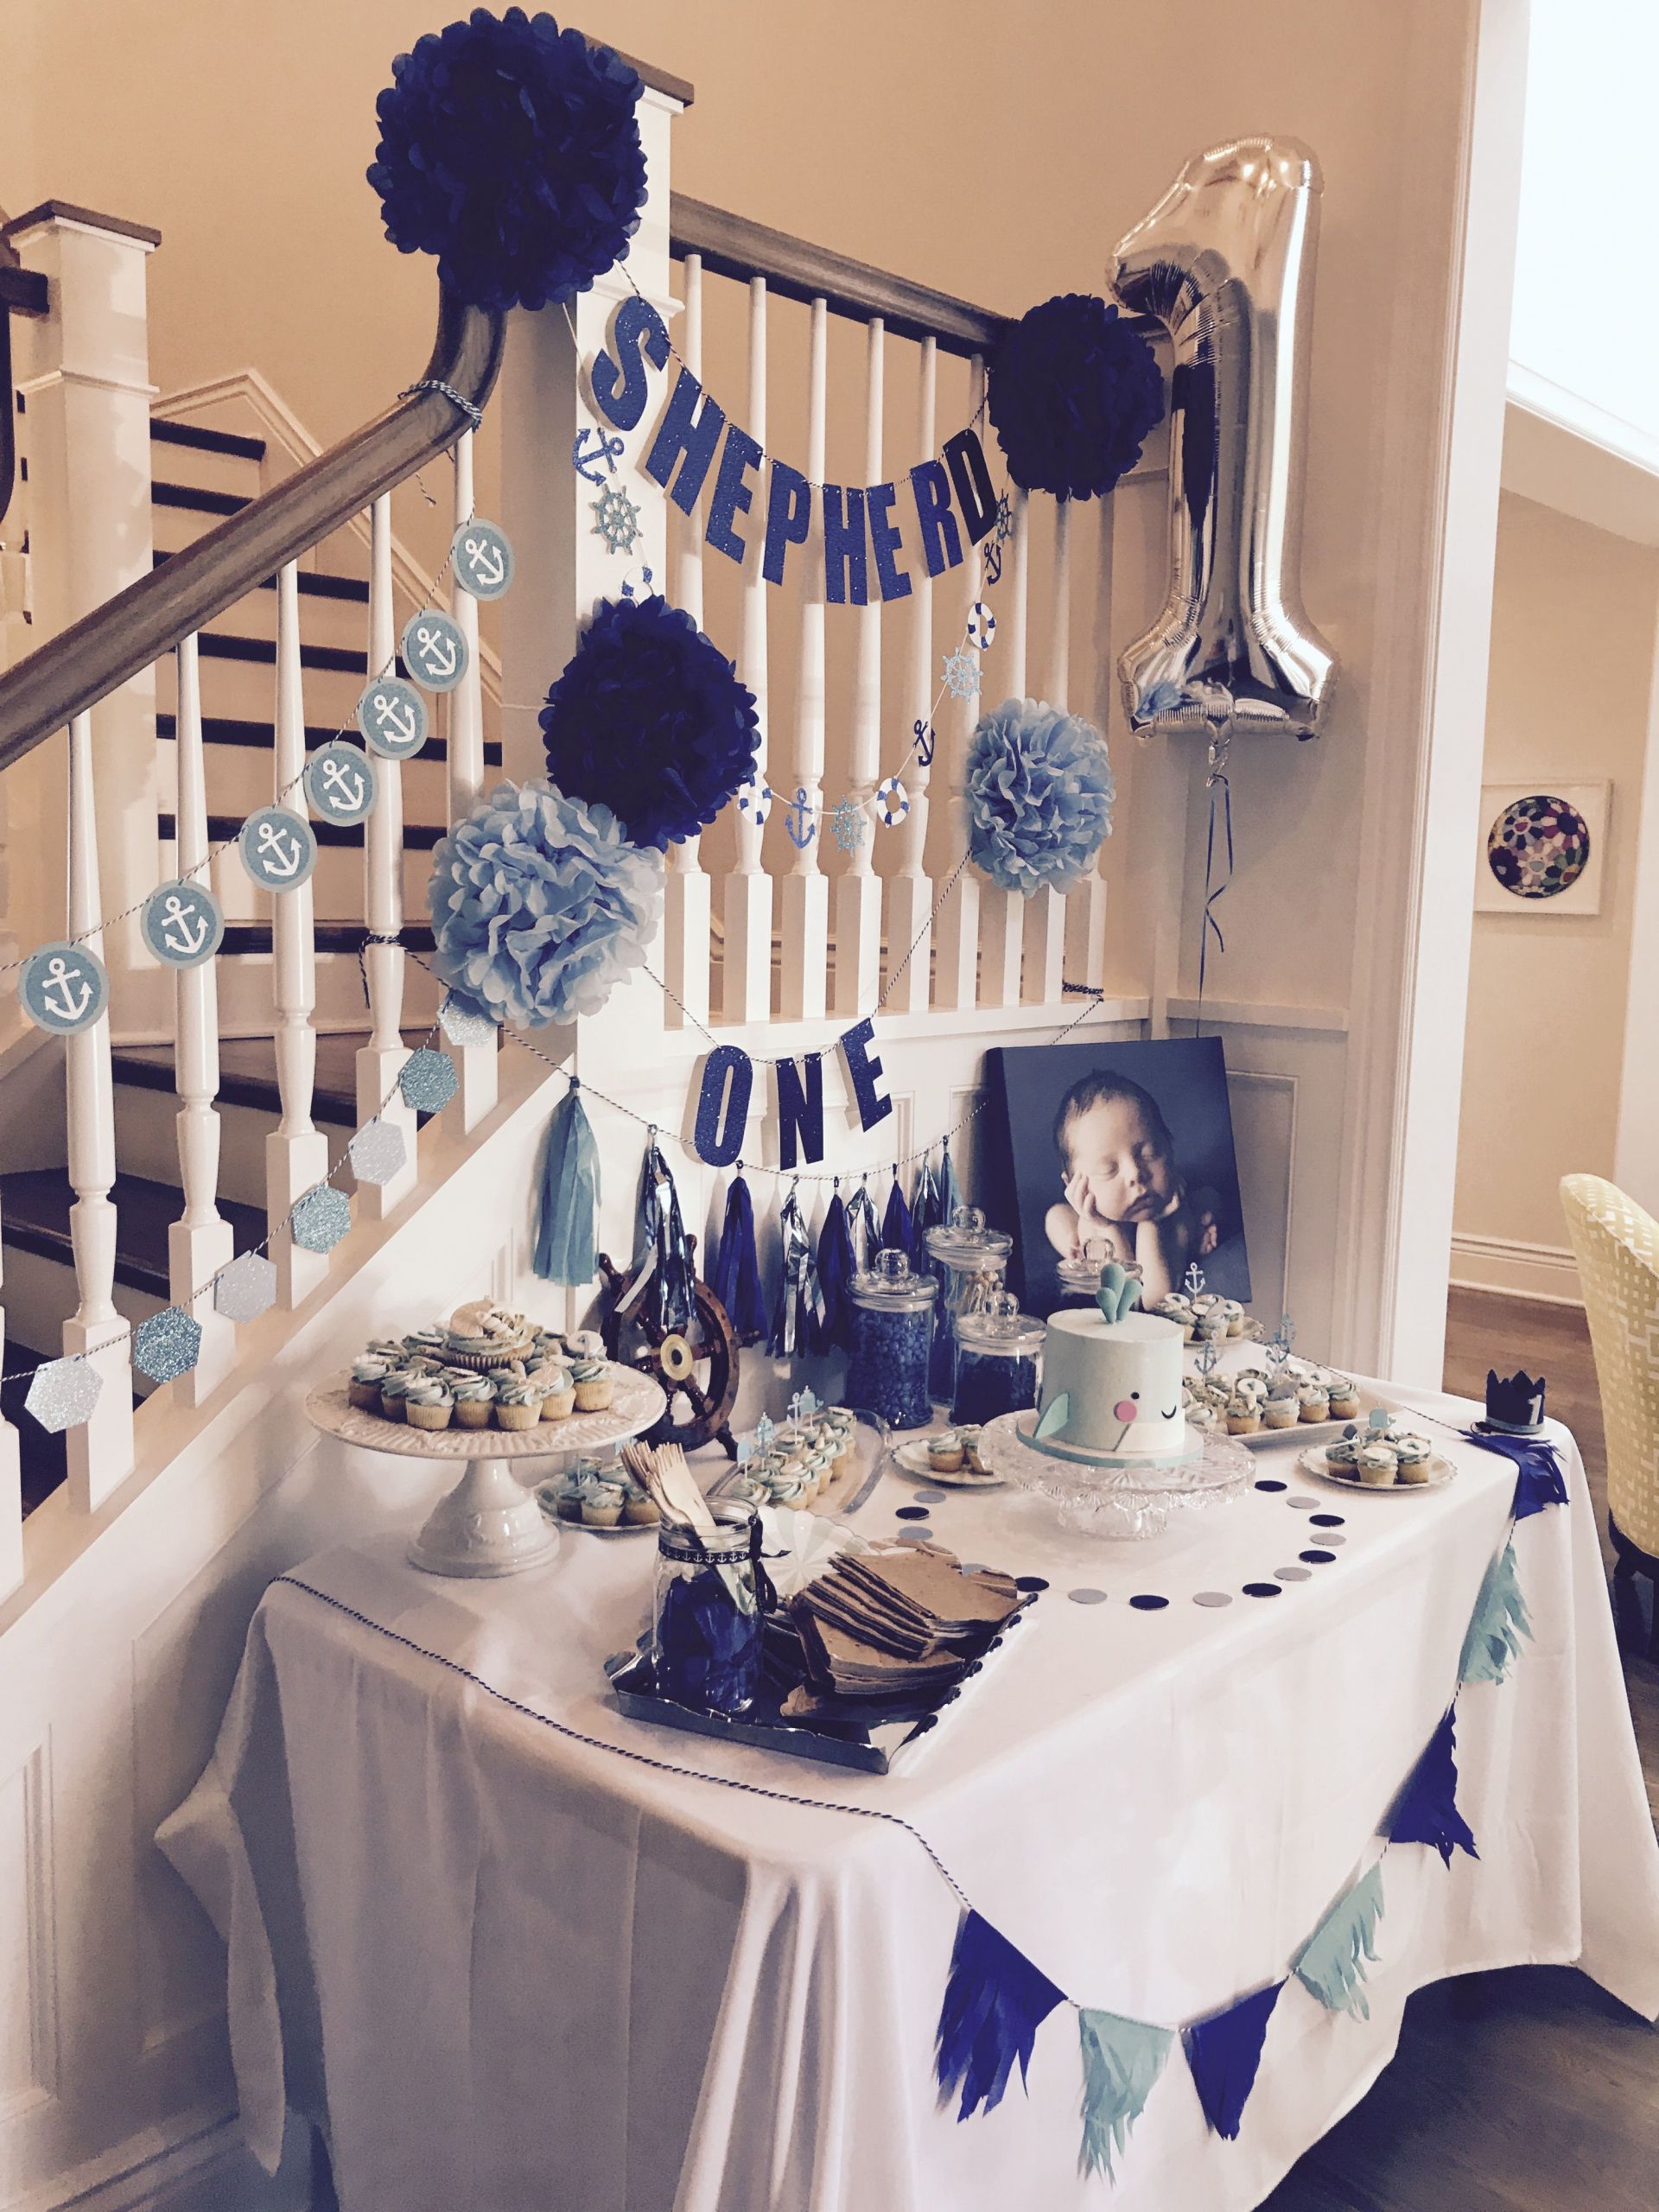 Baby Boy First Birthday Party Decorations
 Dessert table for baby s first birthday